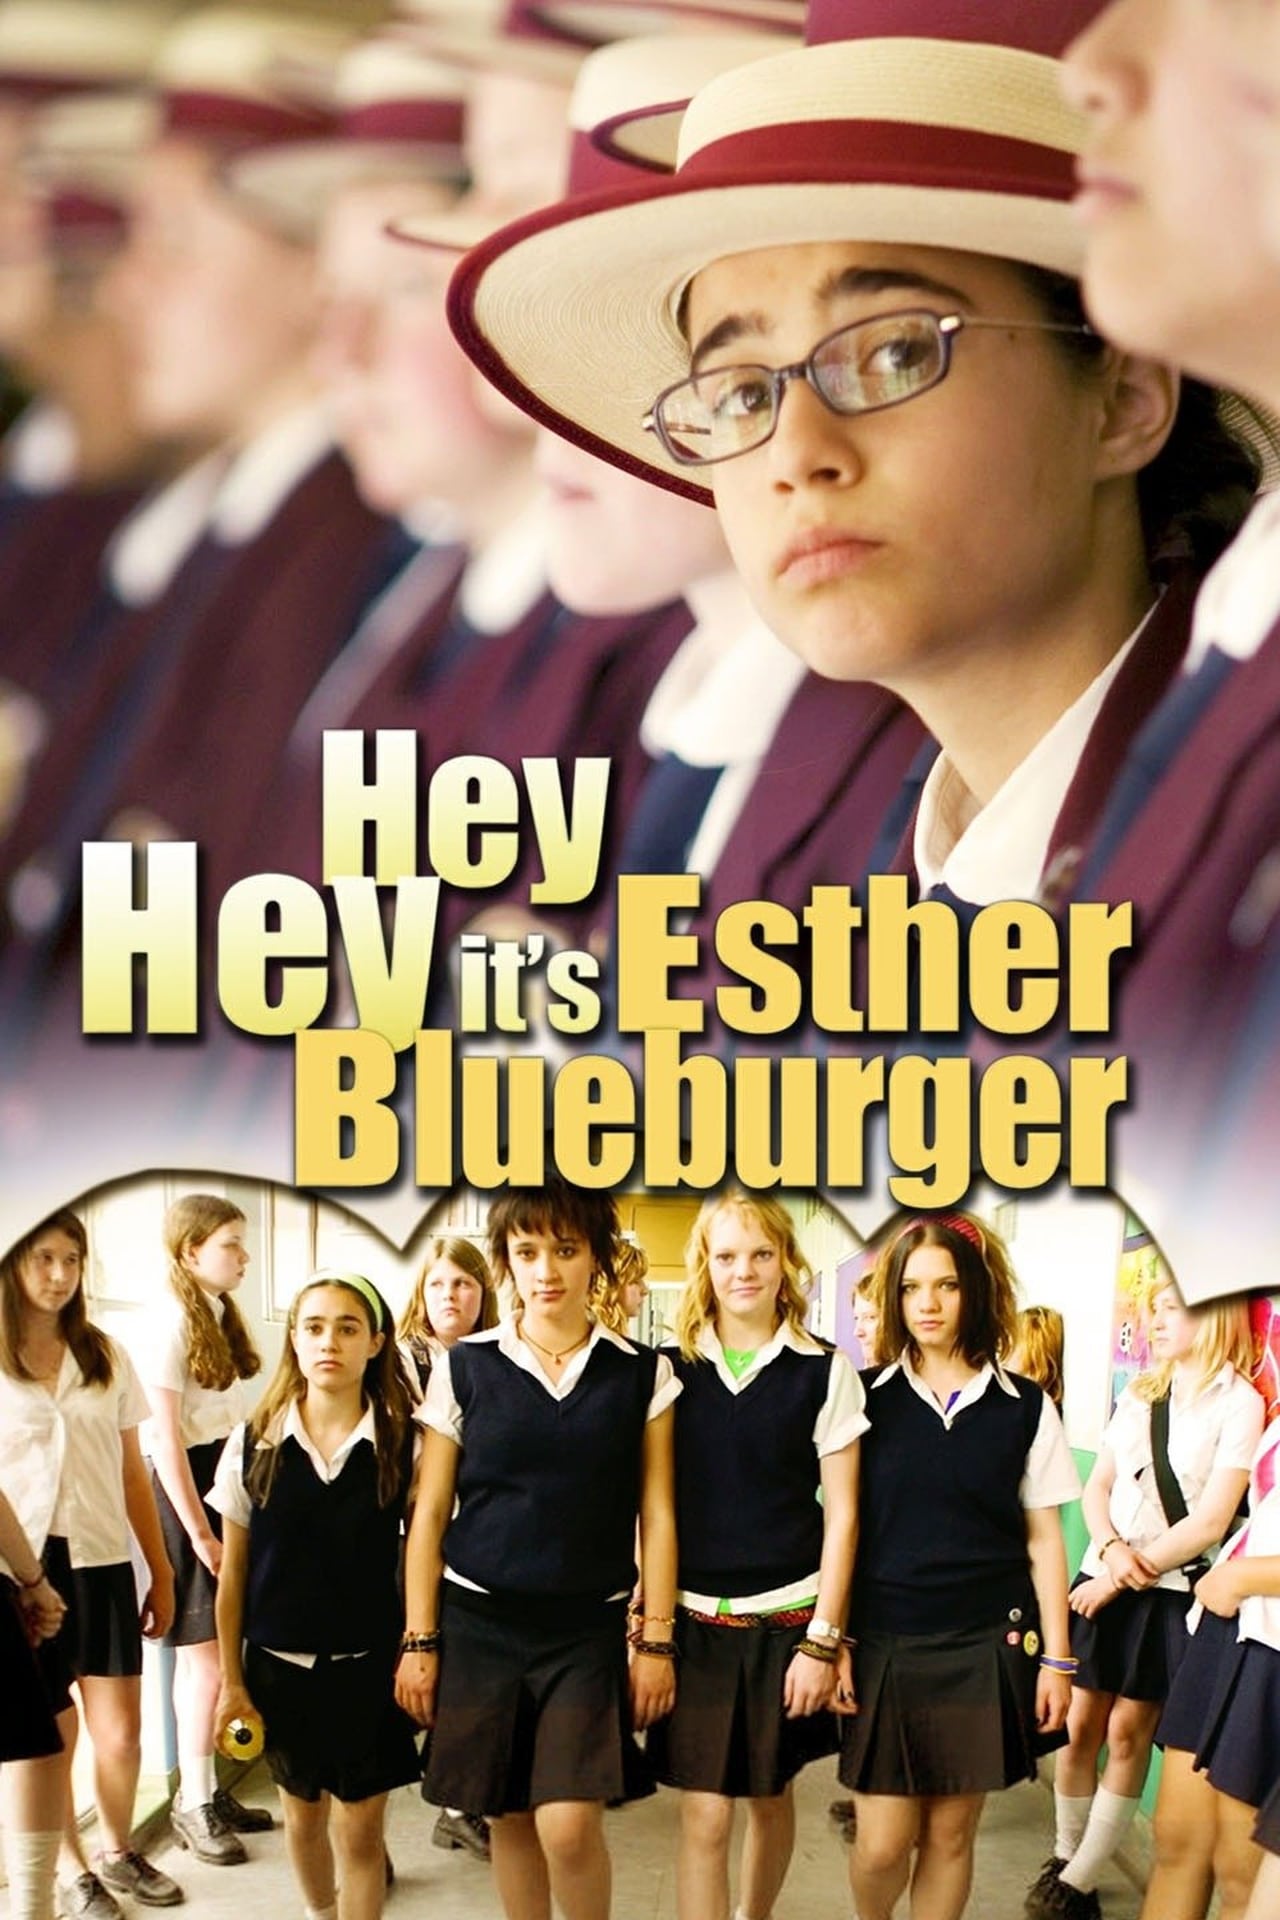 Hey Hey It’s Esther Blueburger